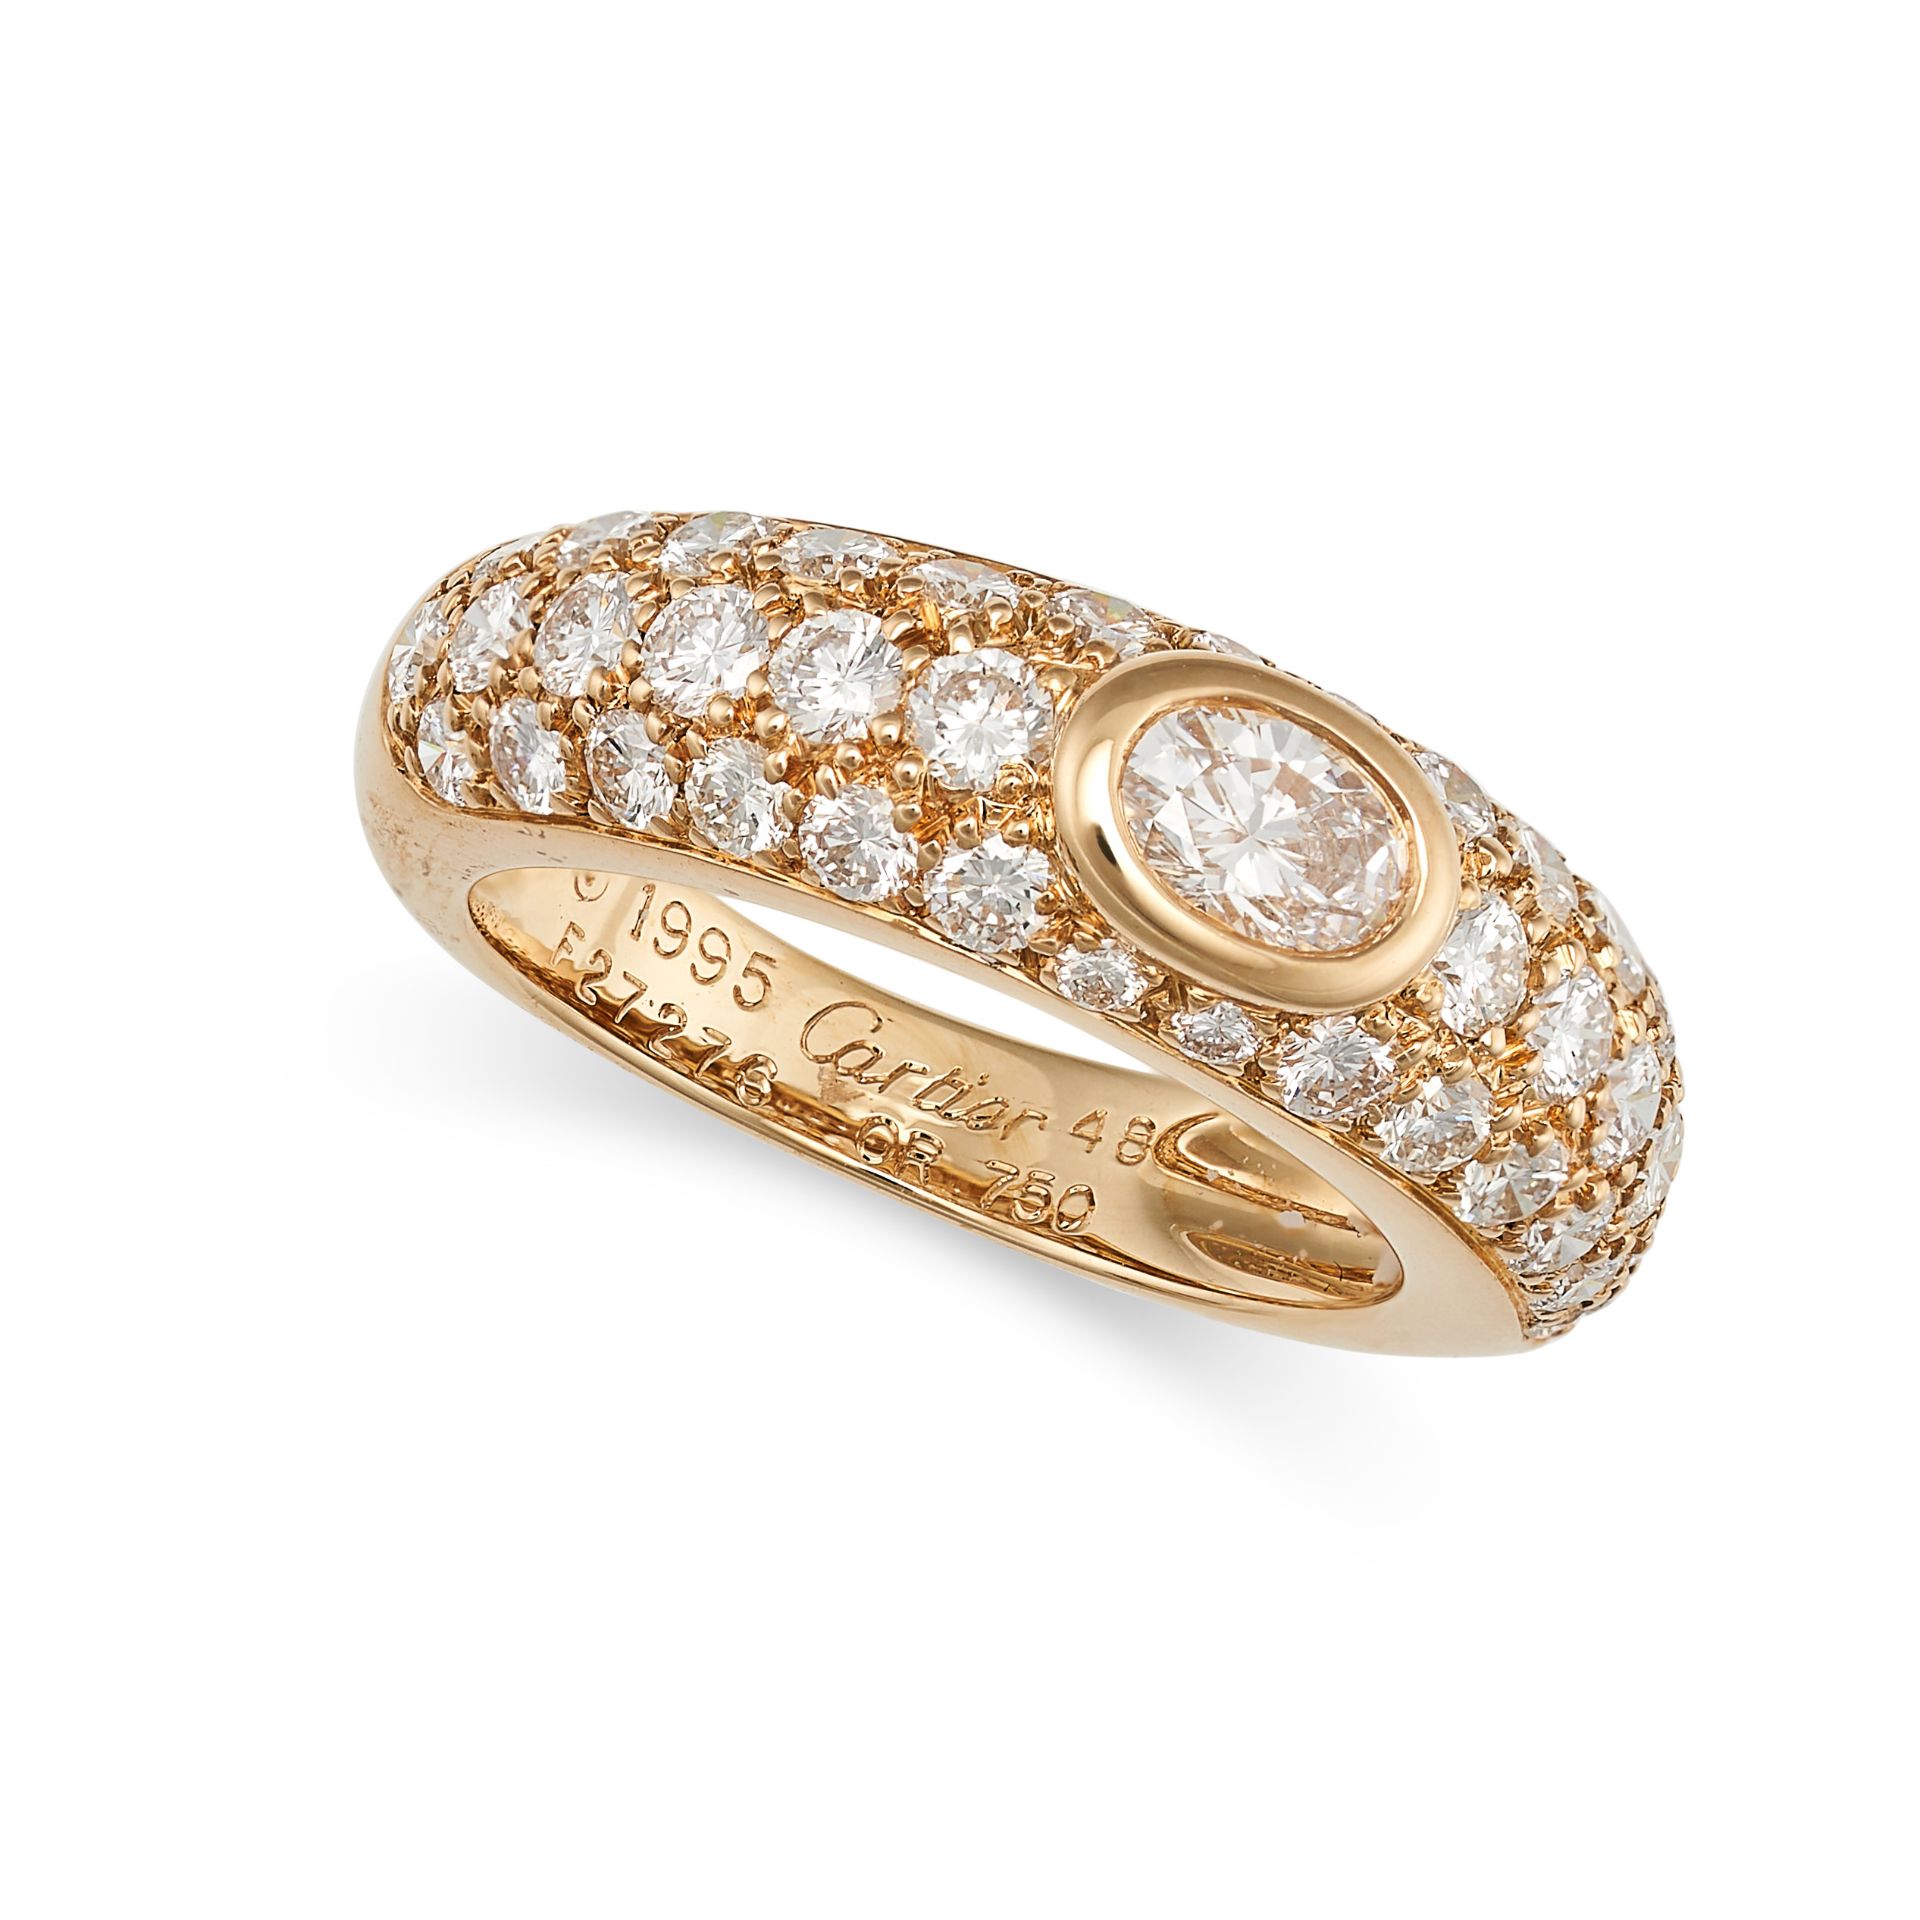 CARTIER, A DIAMOND RING in 18ct yellow gold, set with an oval cut diamond, the band accented by r...